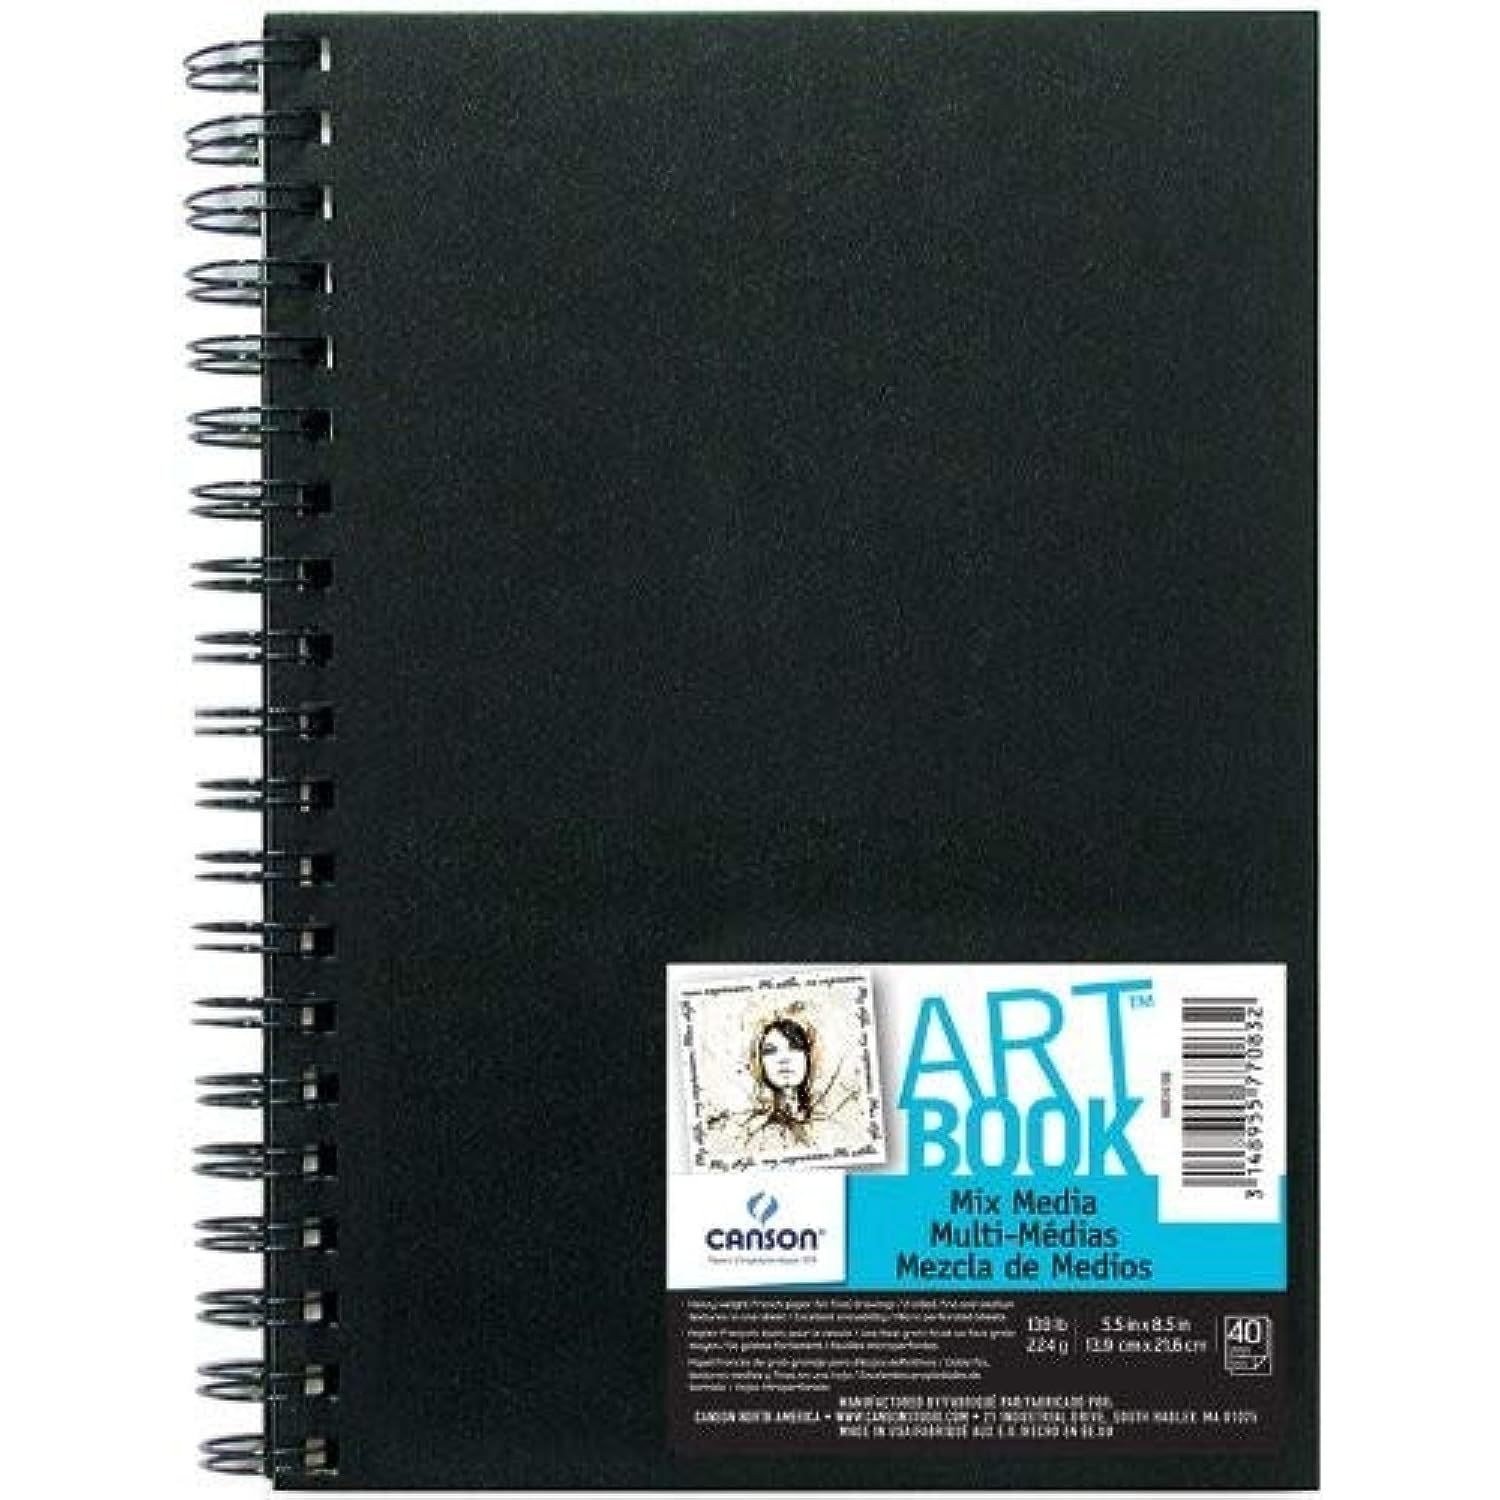 Strathmore 400 Series Sketch Pad - 9 x 12, Spiral Bound, Side, 50 Sheets